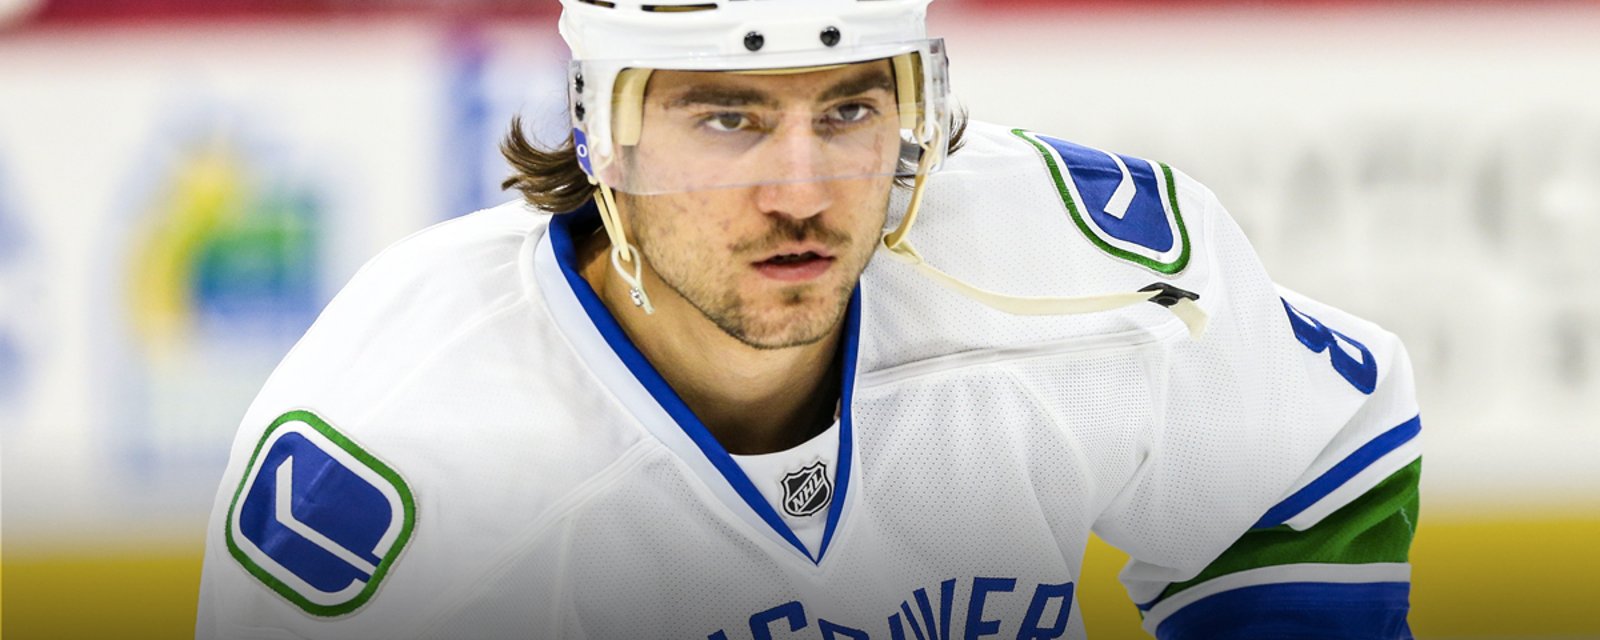 Breaking: Canucks provide critical update on Tanev's injury